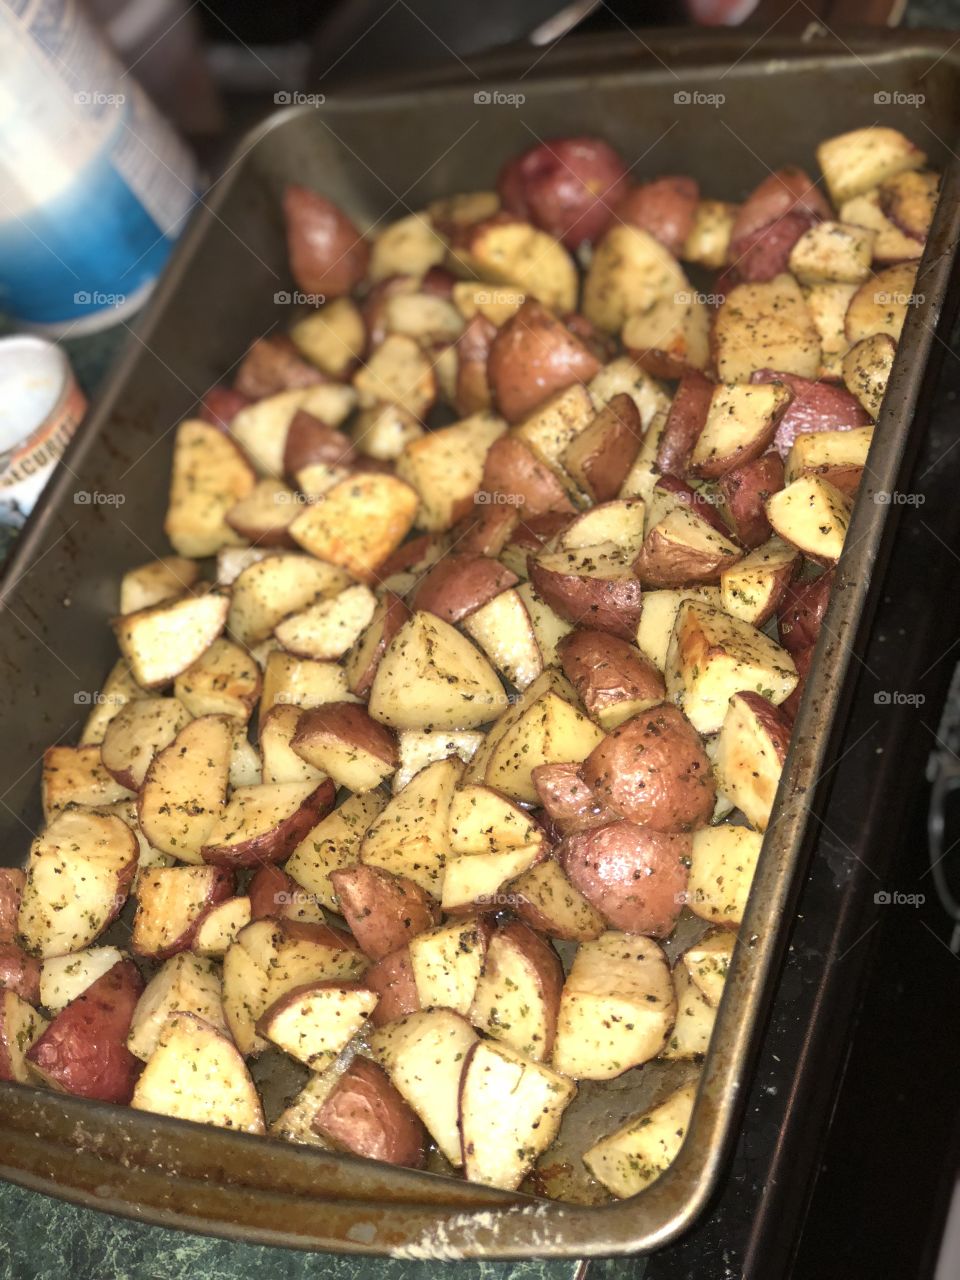 Oven roasted Mediterranean style potatoes for dinner 